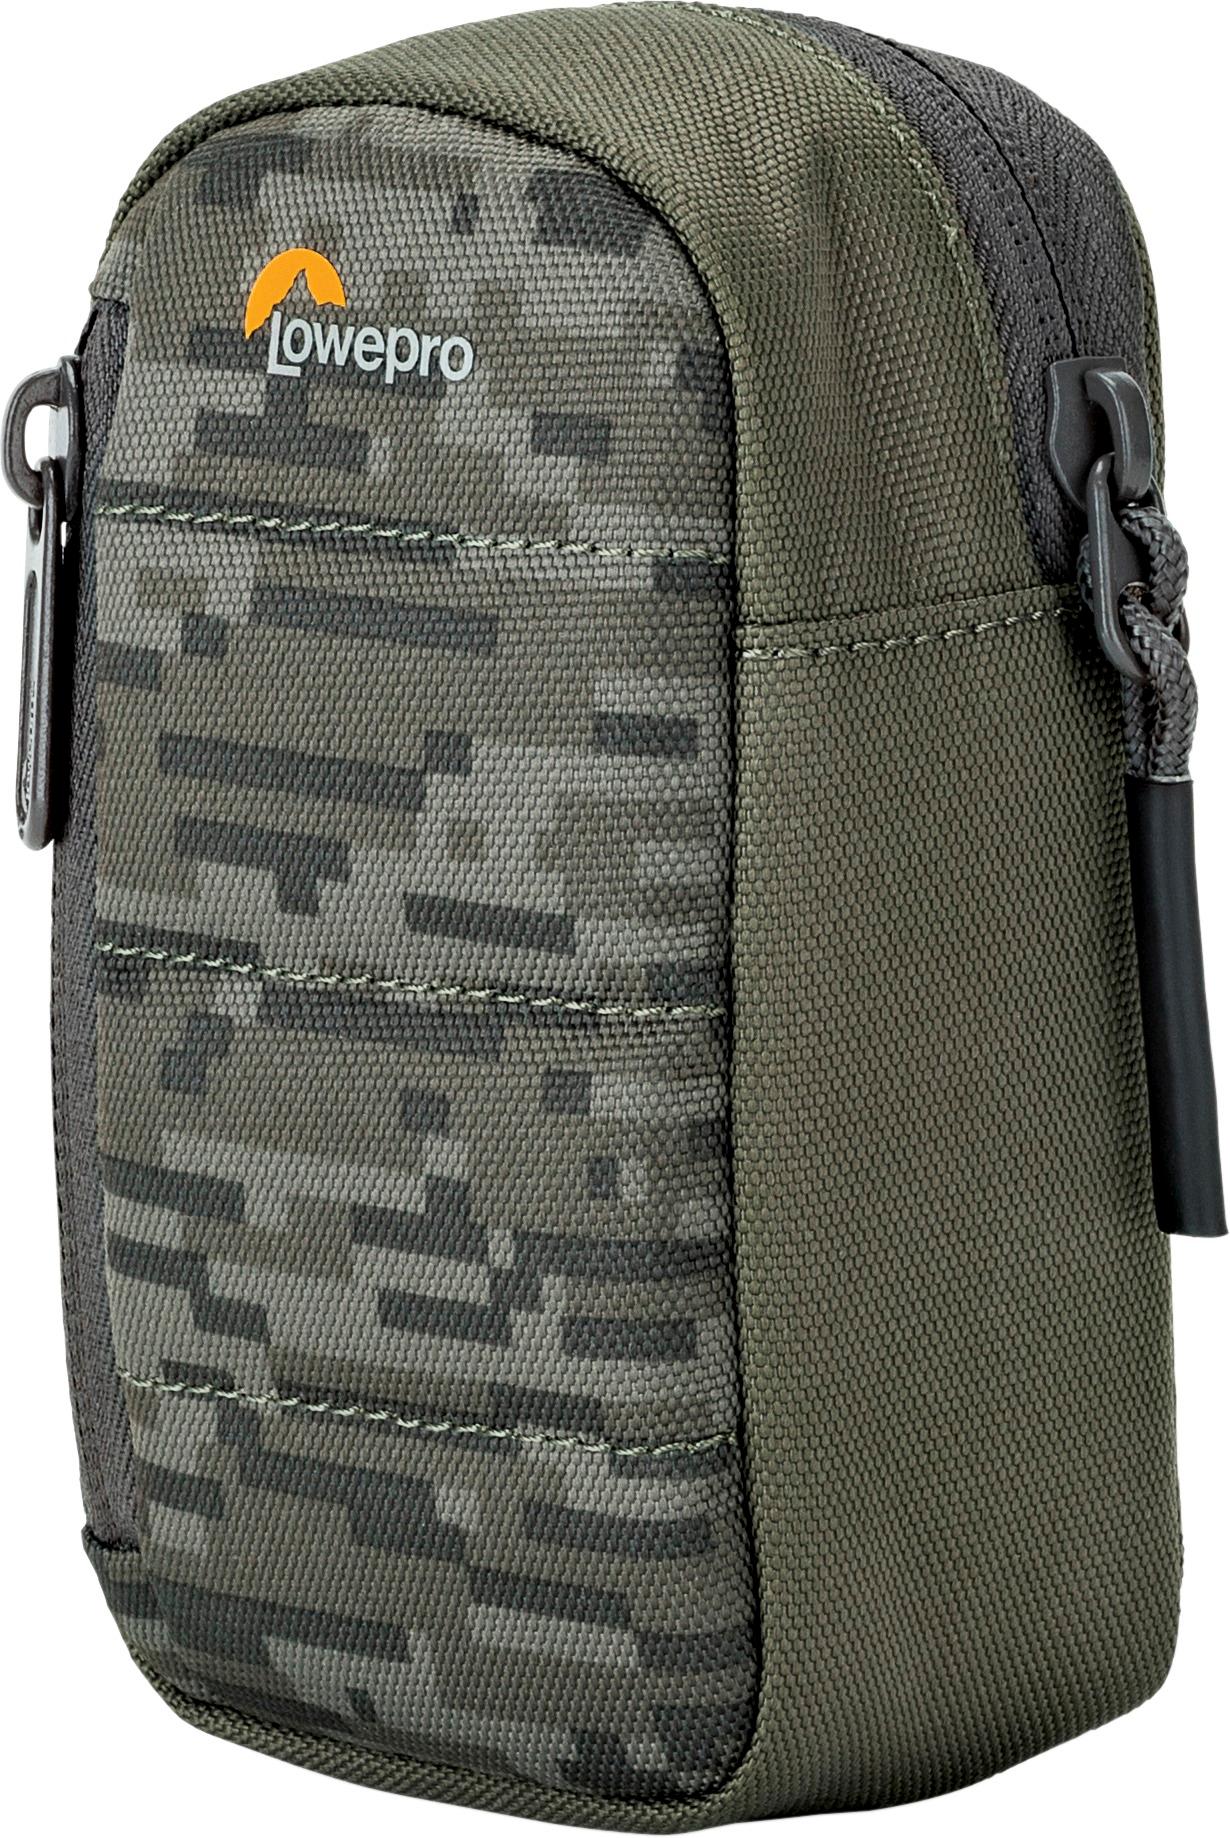 Questions and Answers: Lowepro Tahoe Camera Case Pixel camo LP37064 ...